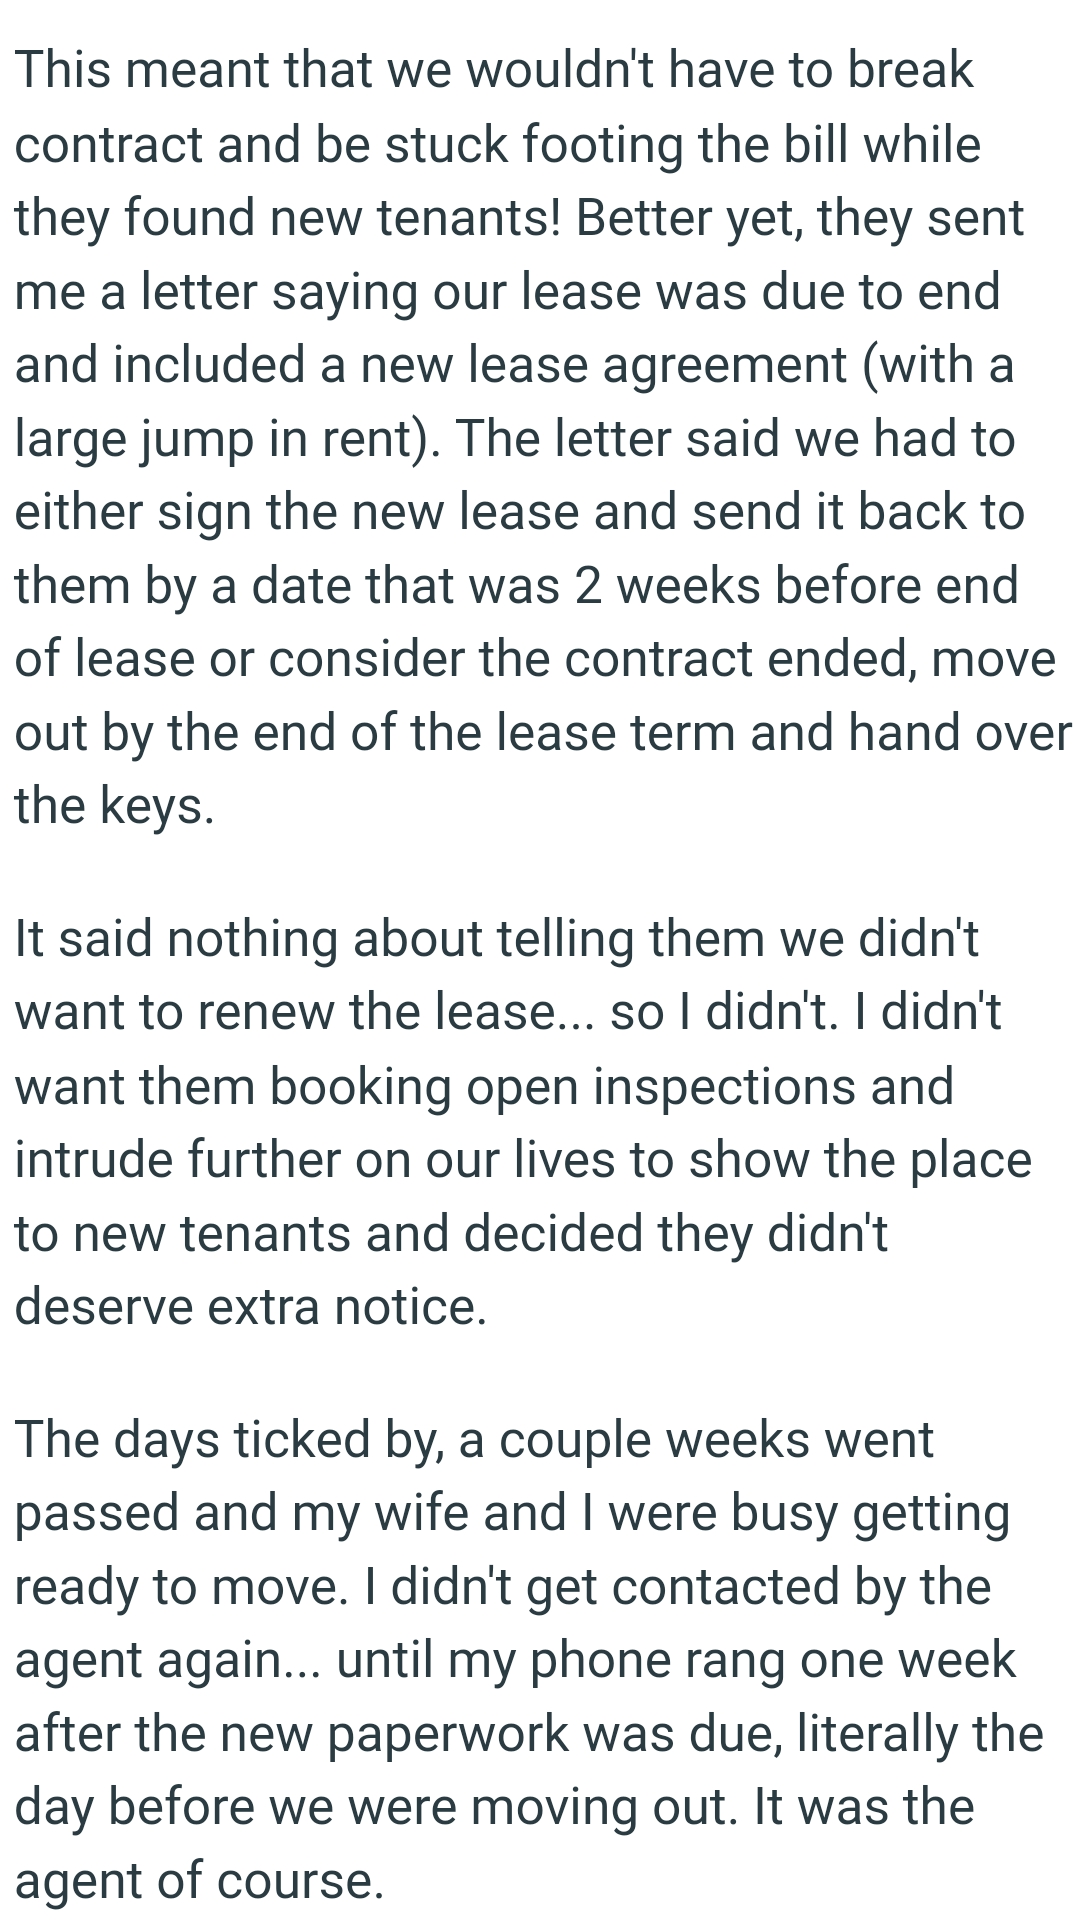 They sent OP a letter saying their lease was due to end and included a new lease agreement